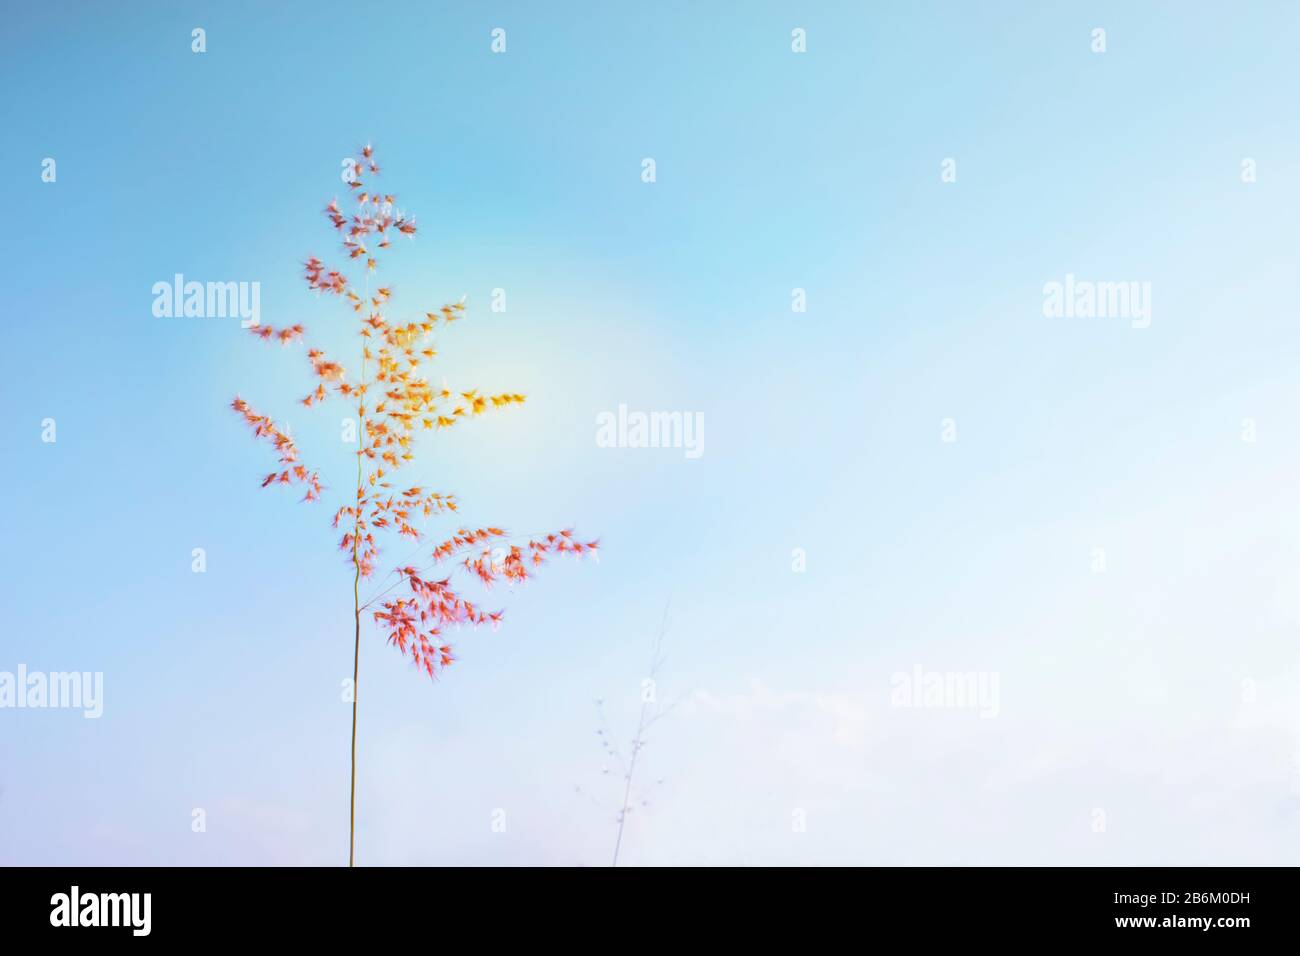 Soft focus image of single red Ruby Grass on light blue sky background, Stock Photo